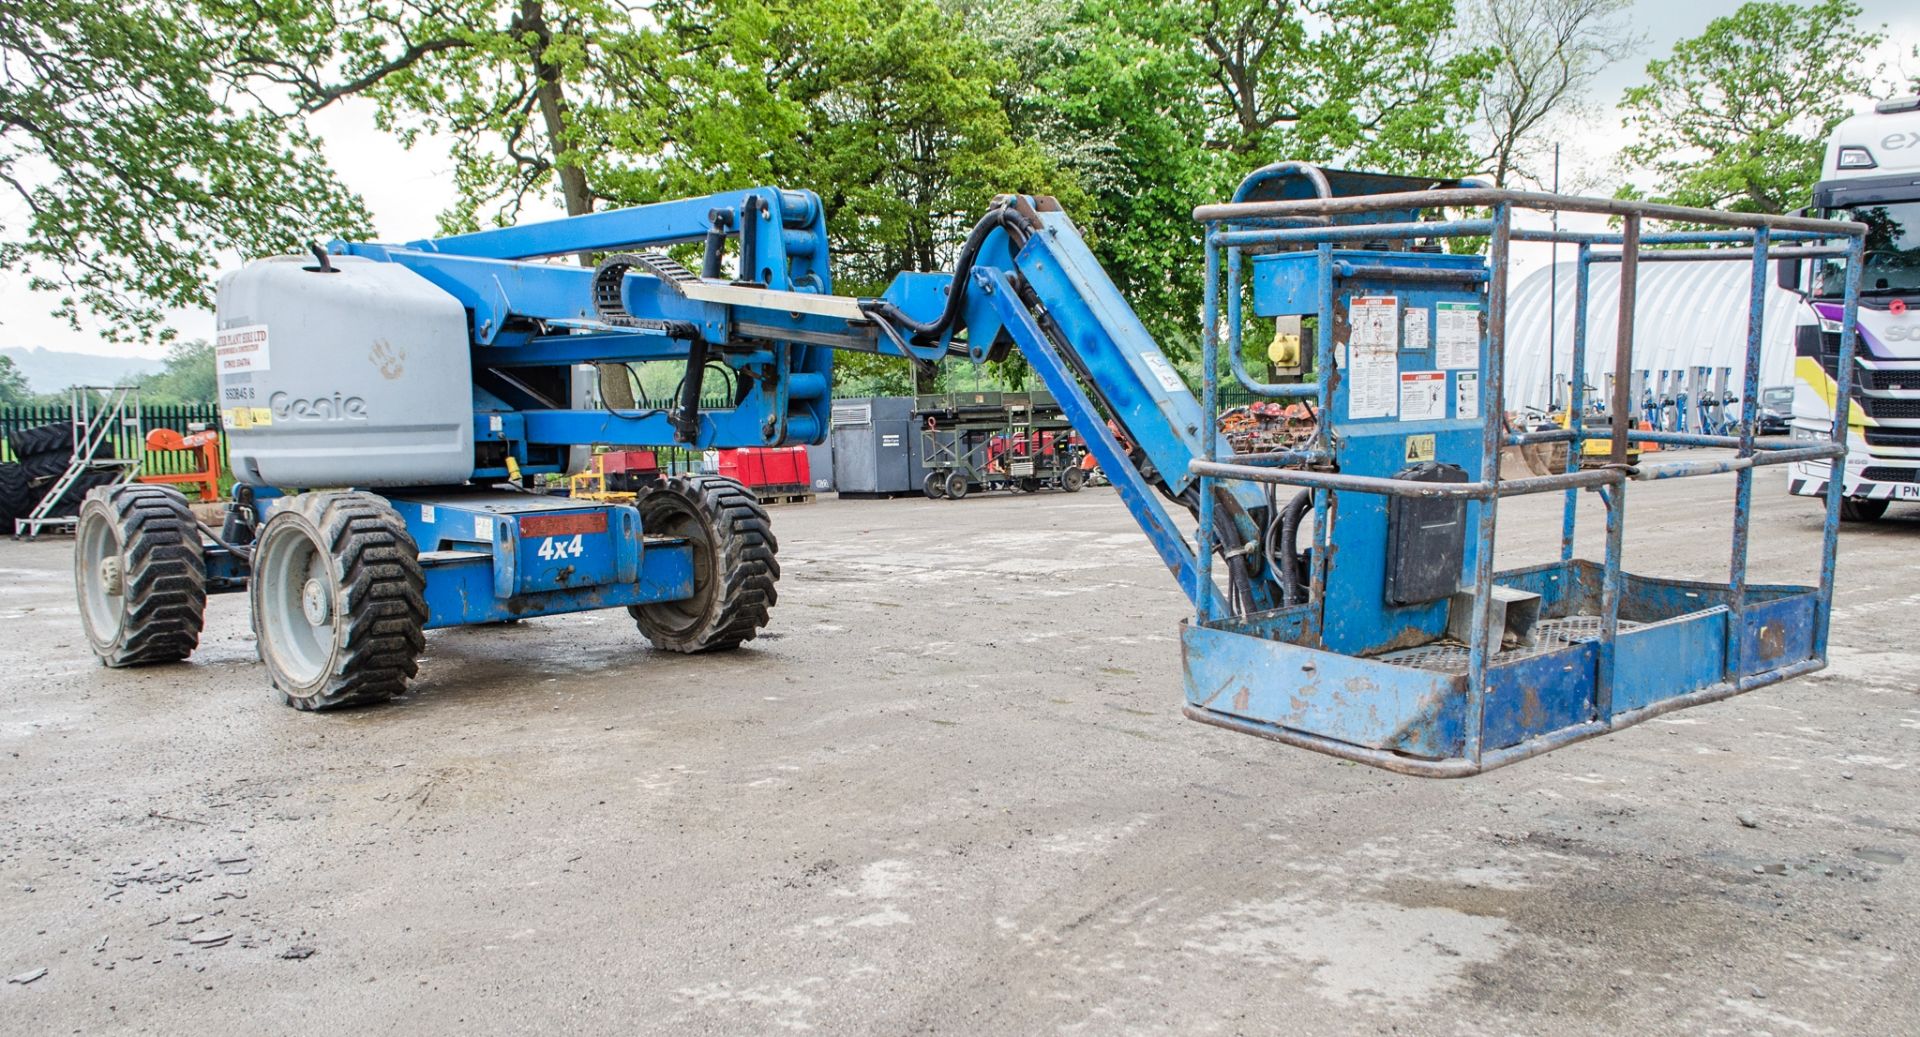 Genie Z-45/25 diesel/battery electric articulated boom access platform Year: 2006 S/N: 31844 - Image 2 of 17